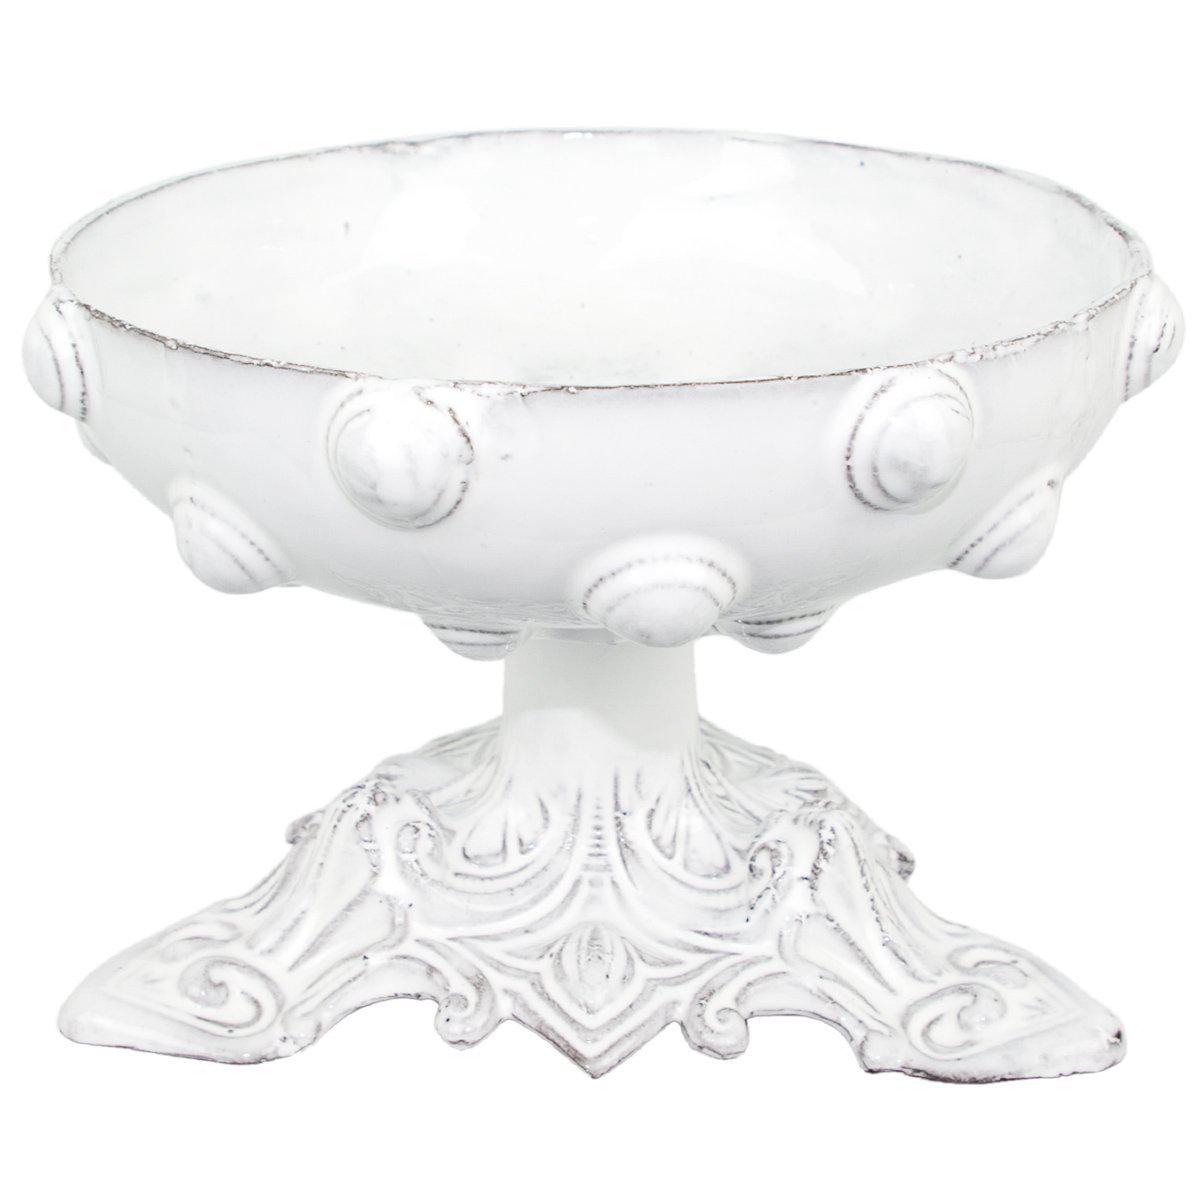 Mademoiselle footed bowl-20x20x15cm-Handmade in France by CARRON